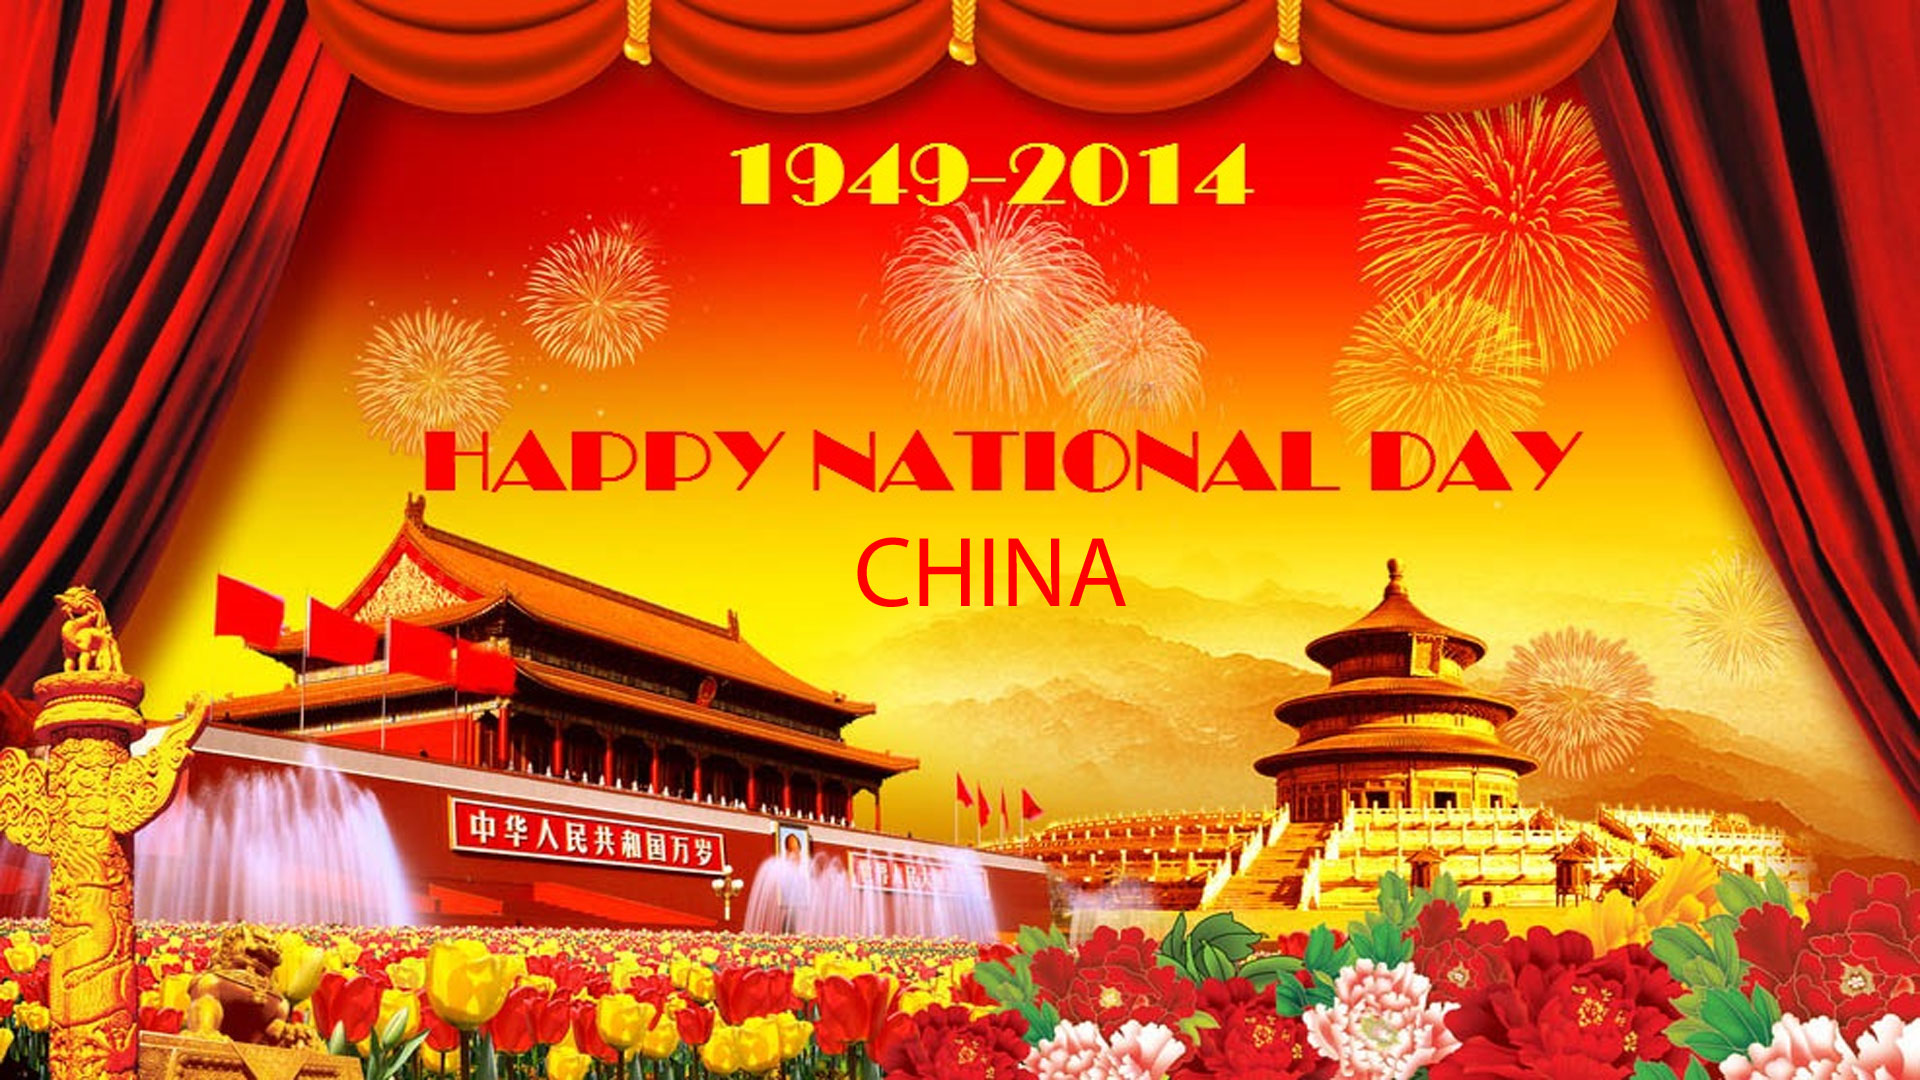 65th National Day of the People's Republic of China Good News!